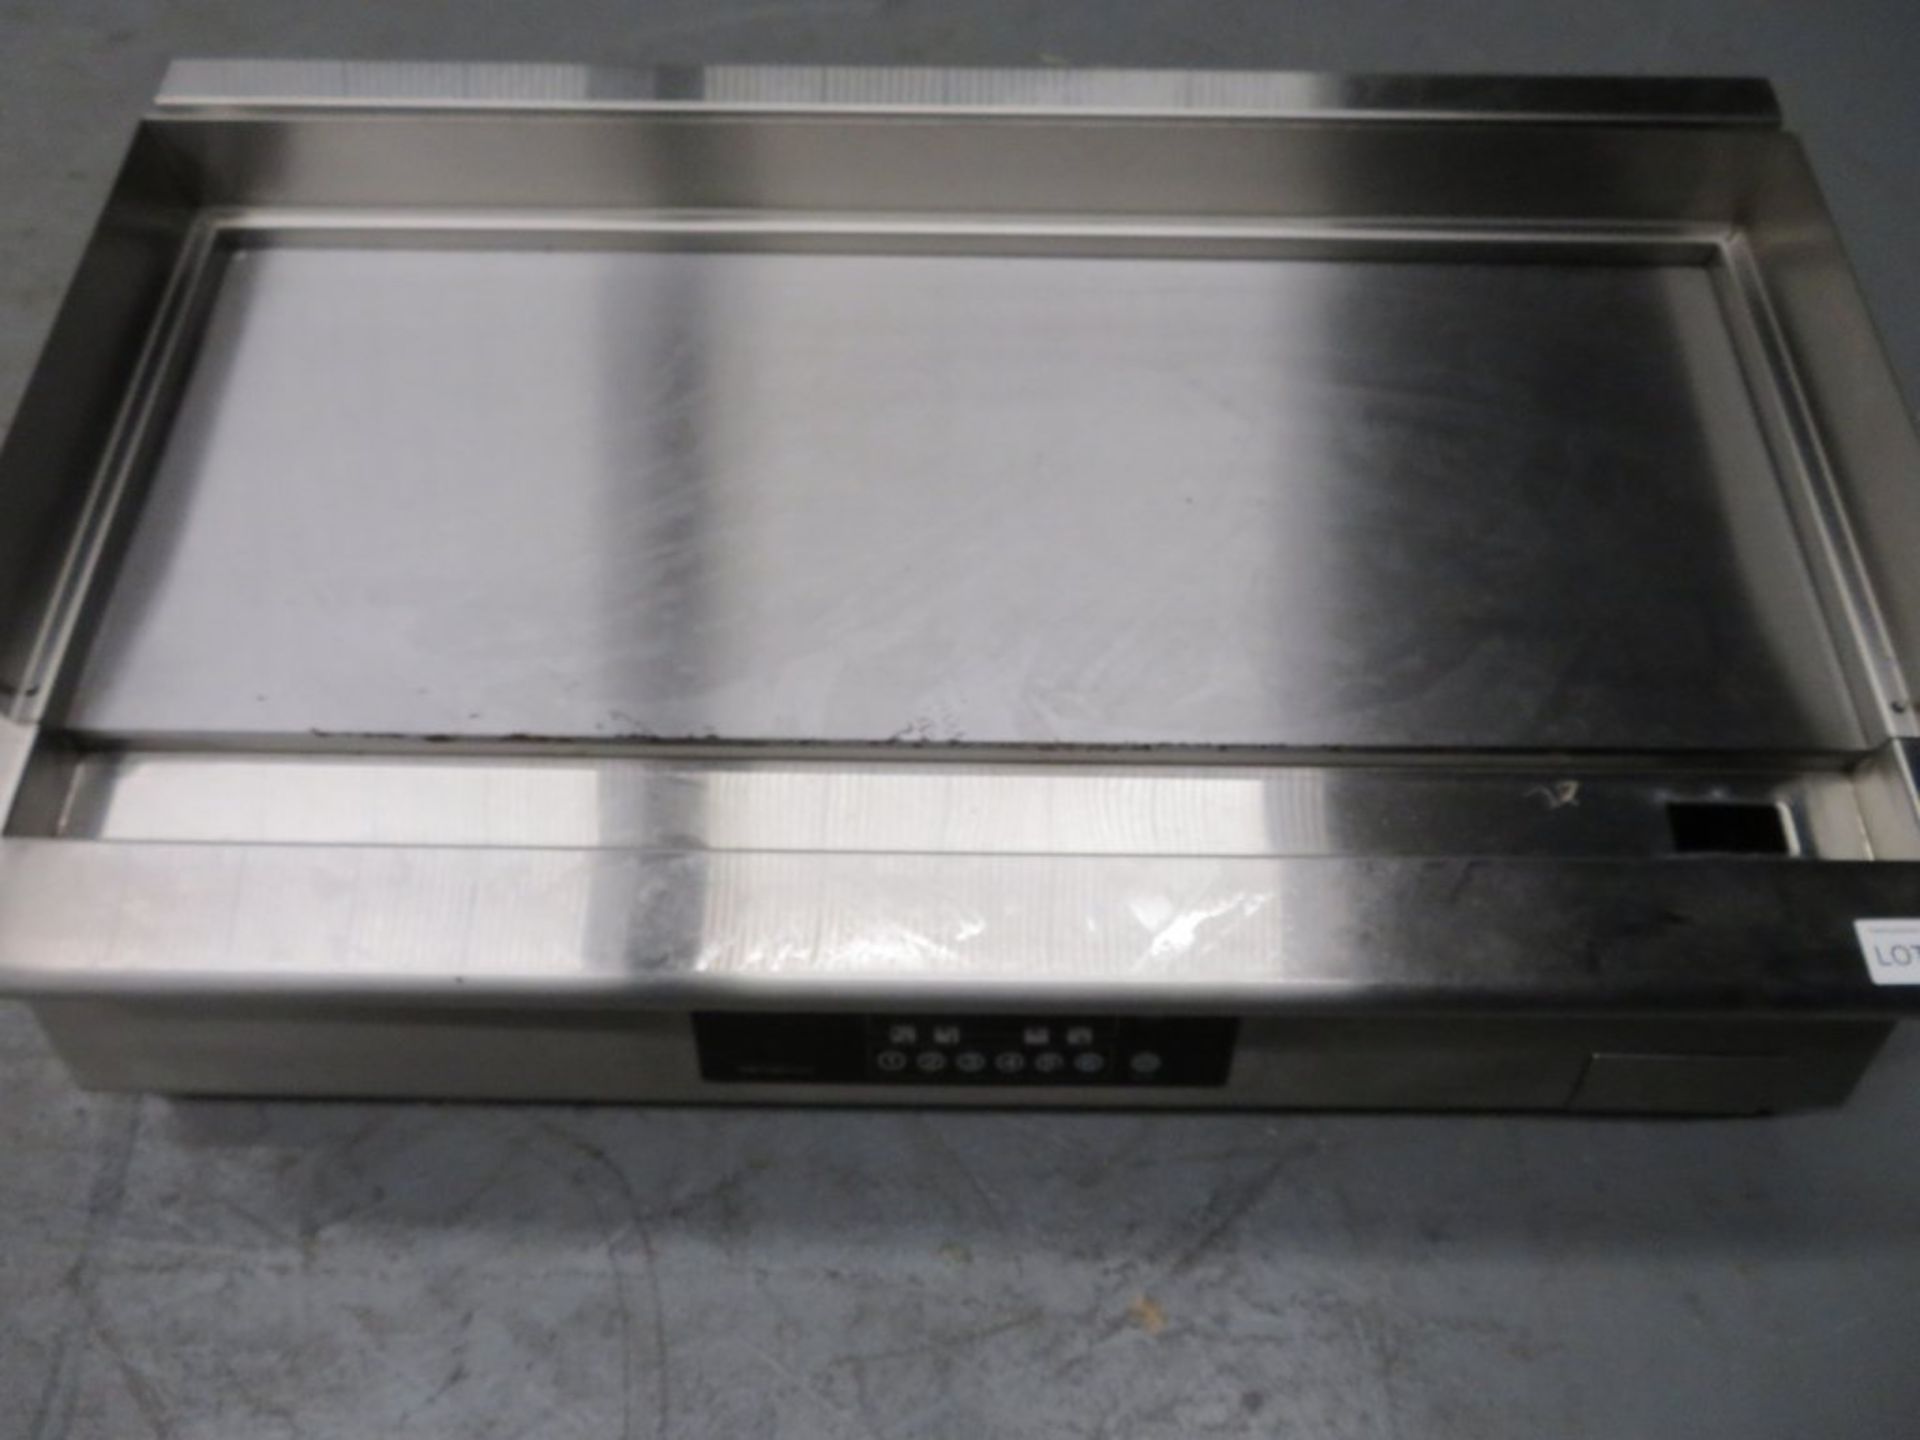 Heavy duty countertop induction griddle (smooth), model RDE-FG-12A, 3 phase, brand new & boxed - Image 4 of 8